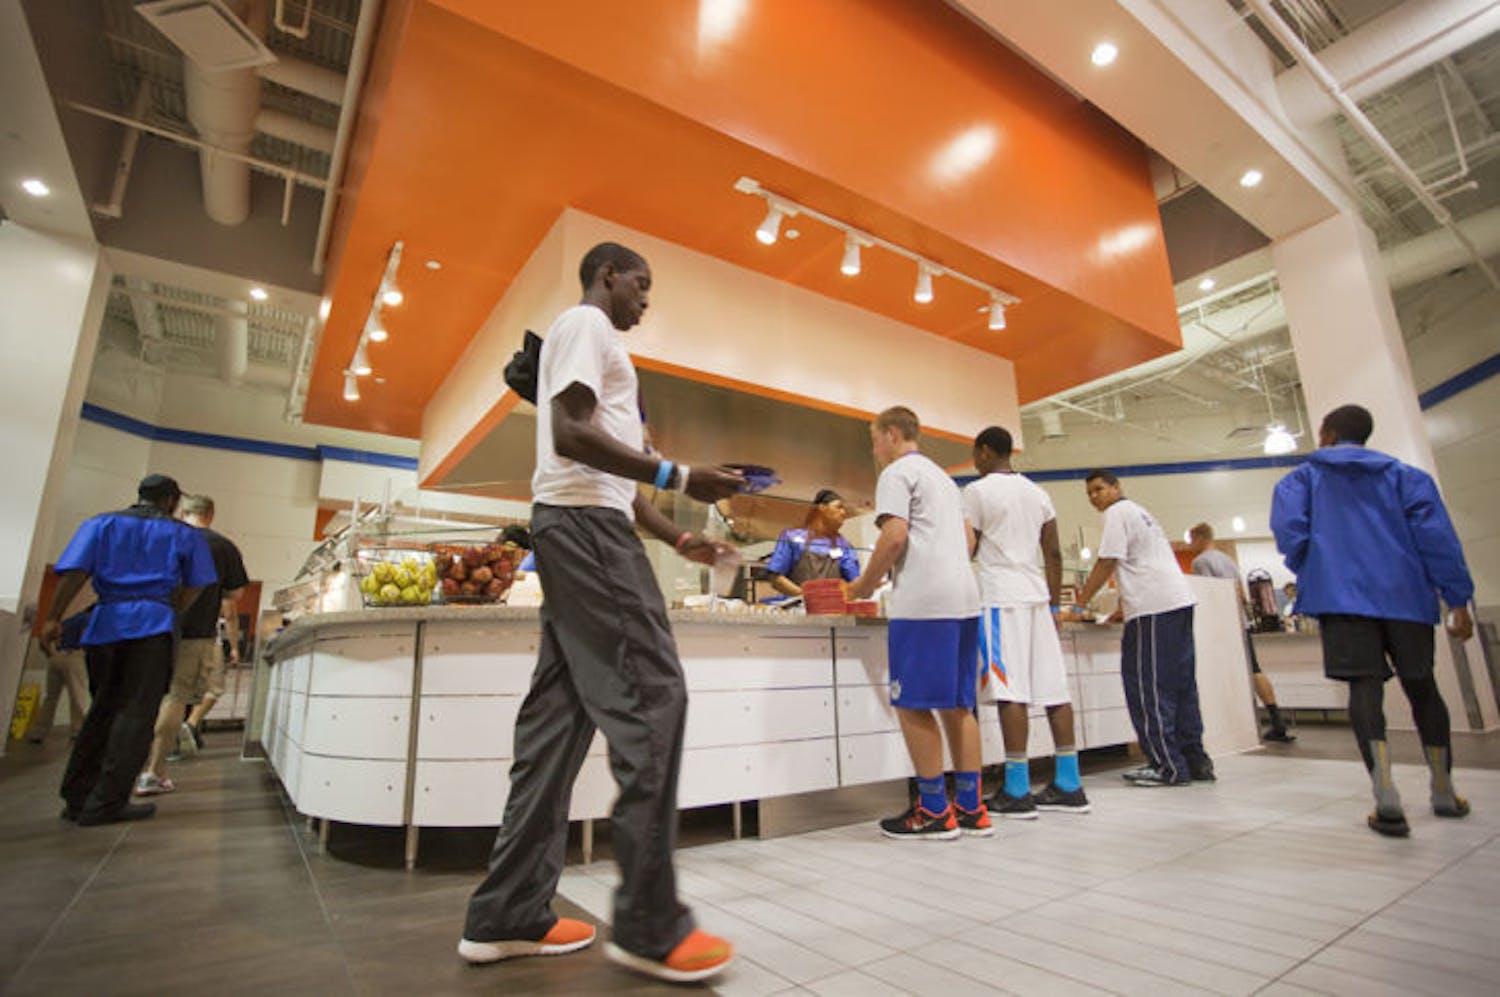 Customers peruse and eat at Gator Corner Dining Center. It reopened Monday after a $2.5 million renovation.